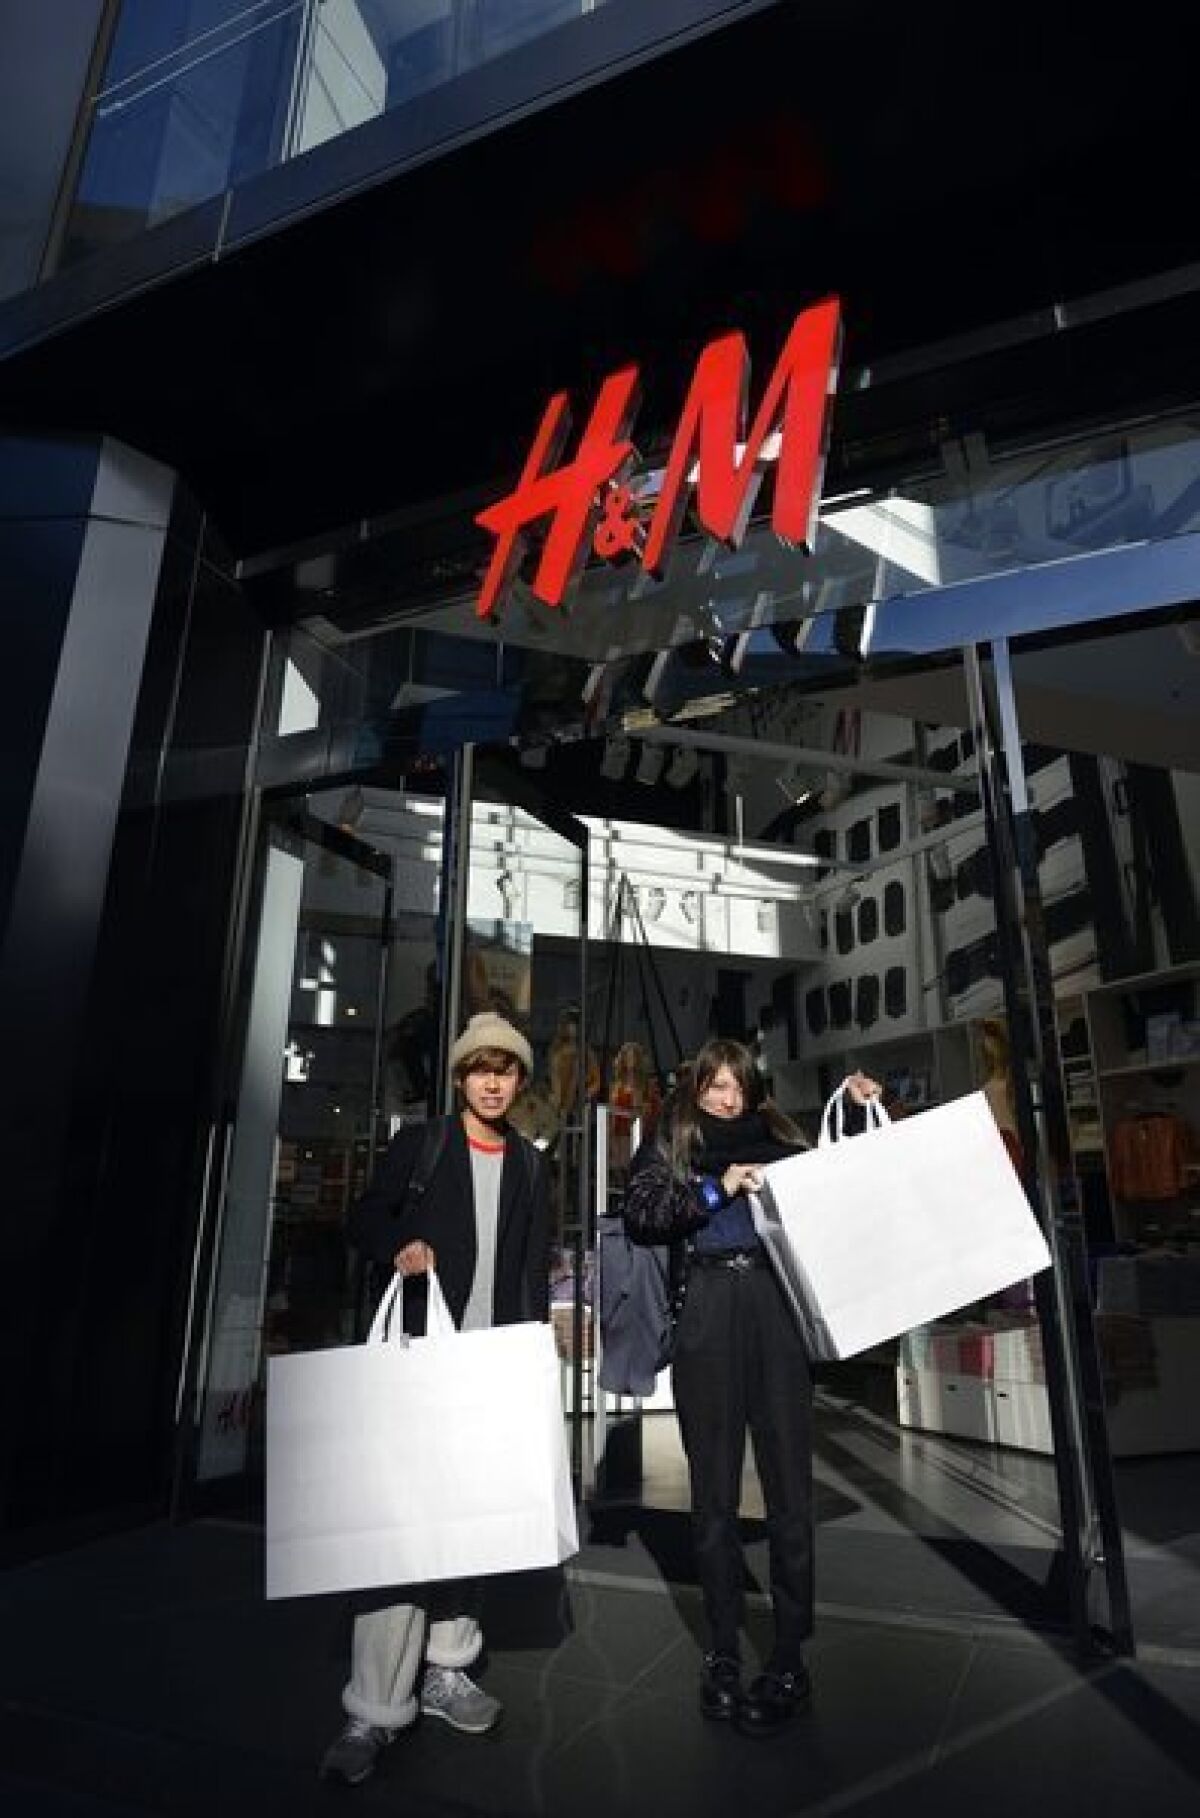 H&M; will start collecting used clothing from shoppers to recycle. Store vouchers will be given in return.